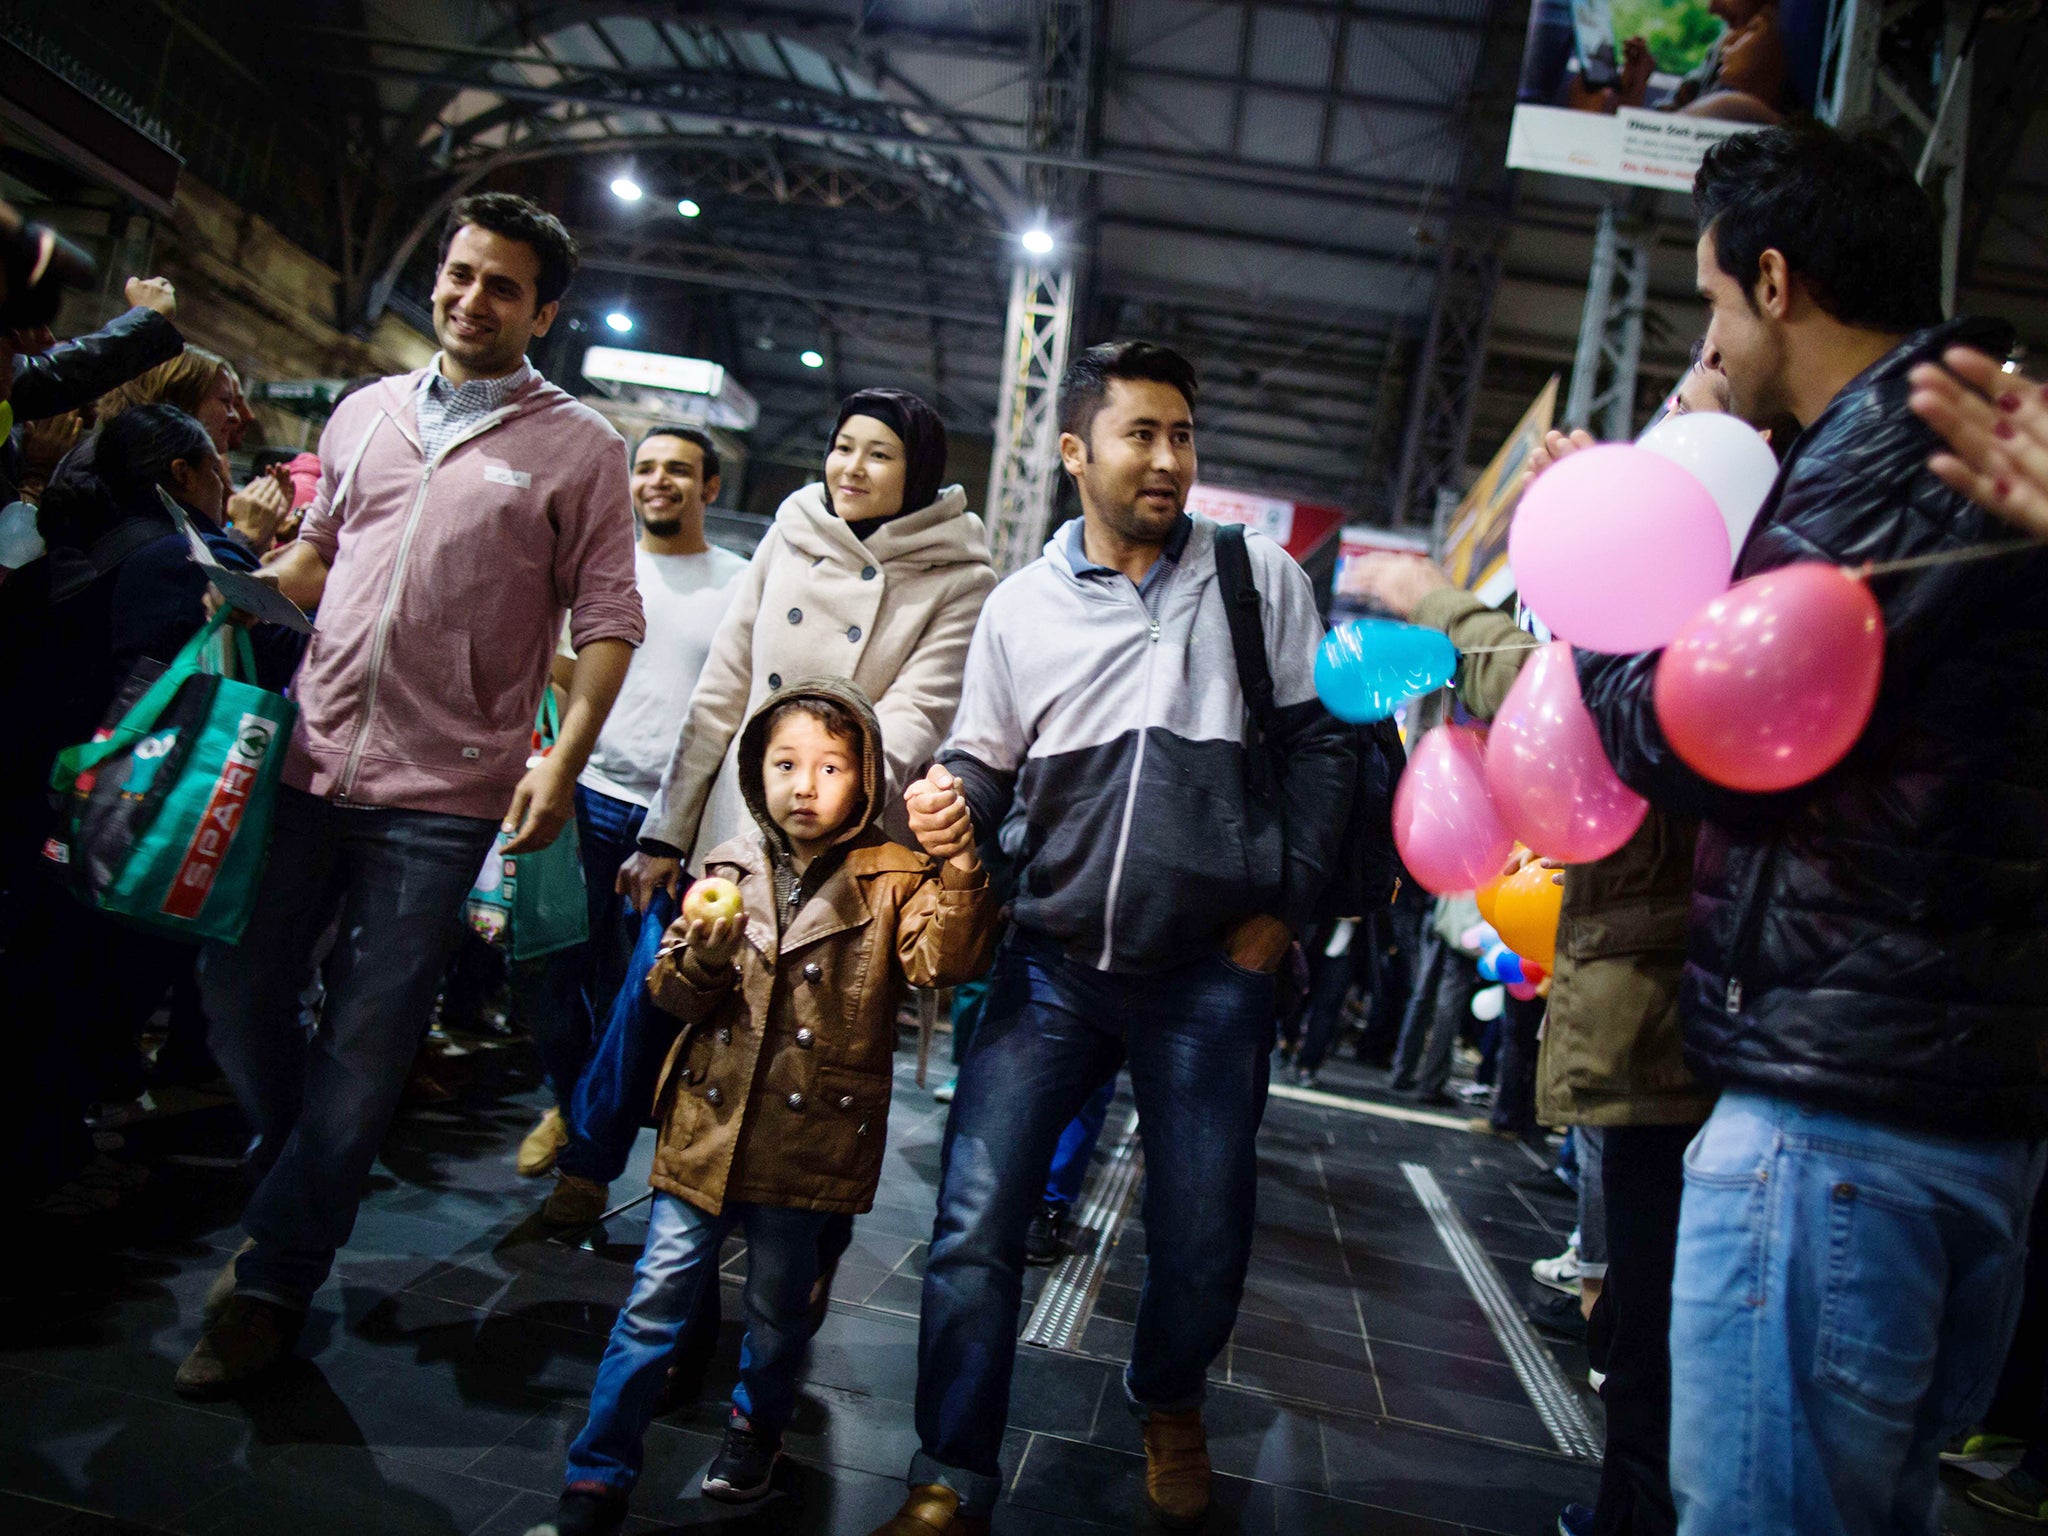 Migrants are welcomed by locals after their arrival at the main railway station in Frankfurt, Germany. Over 1,000 more migrants arrived in Germany to cheers and "welcome" signs, but calls grew for a European solution to its worst refugee crisis since Worl